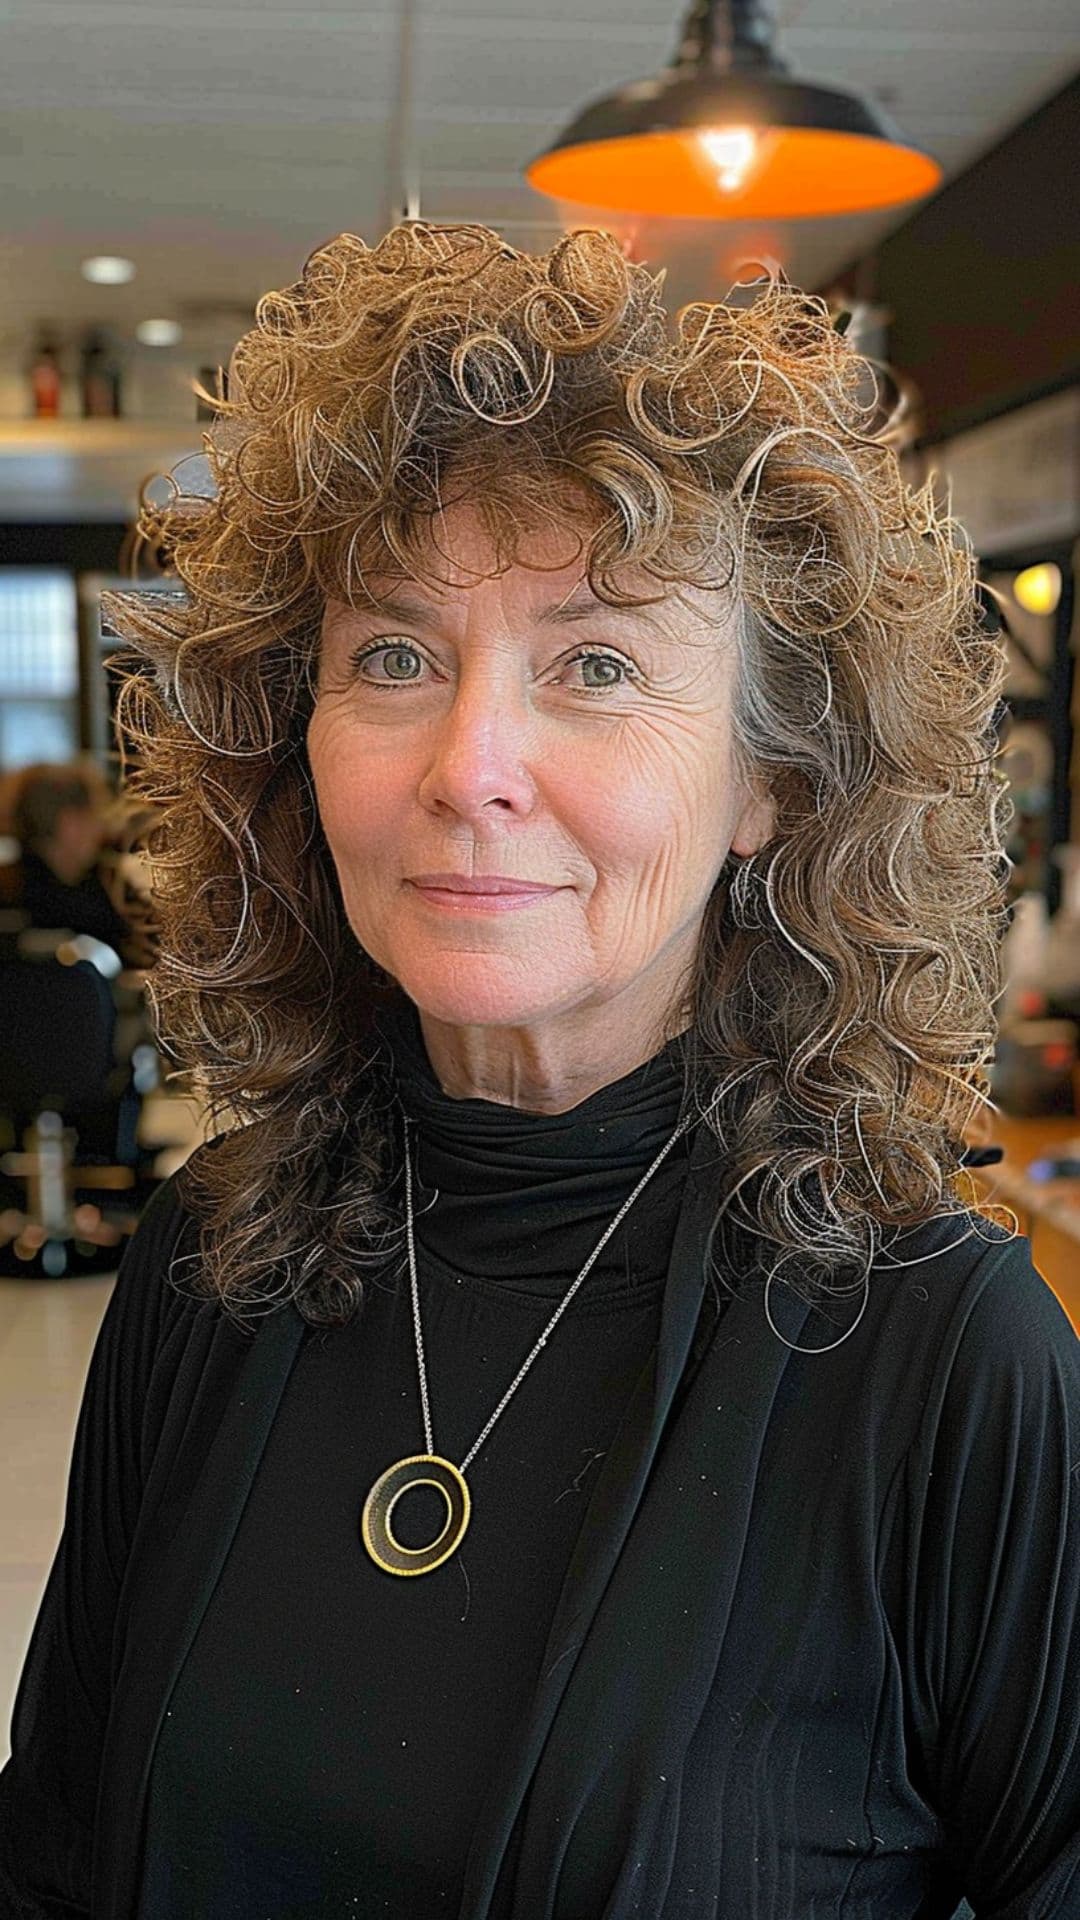 An older woman modelling a fringe bangs with curly hair.